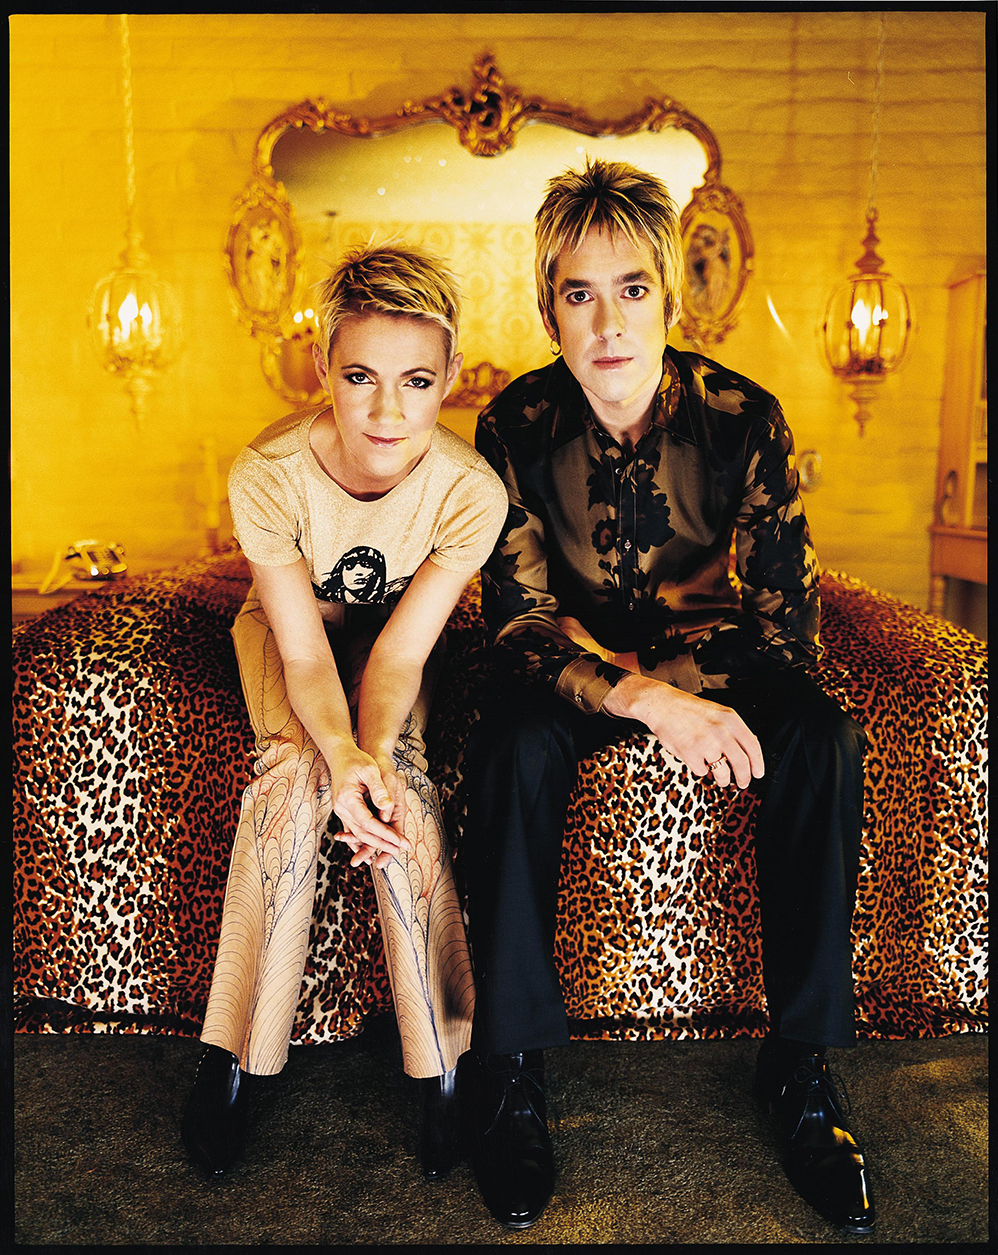 Roxette's Marie Fredriksson and Per Gessle